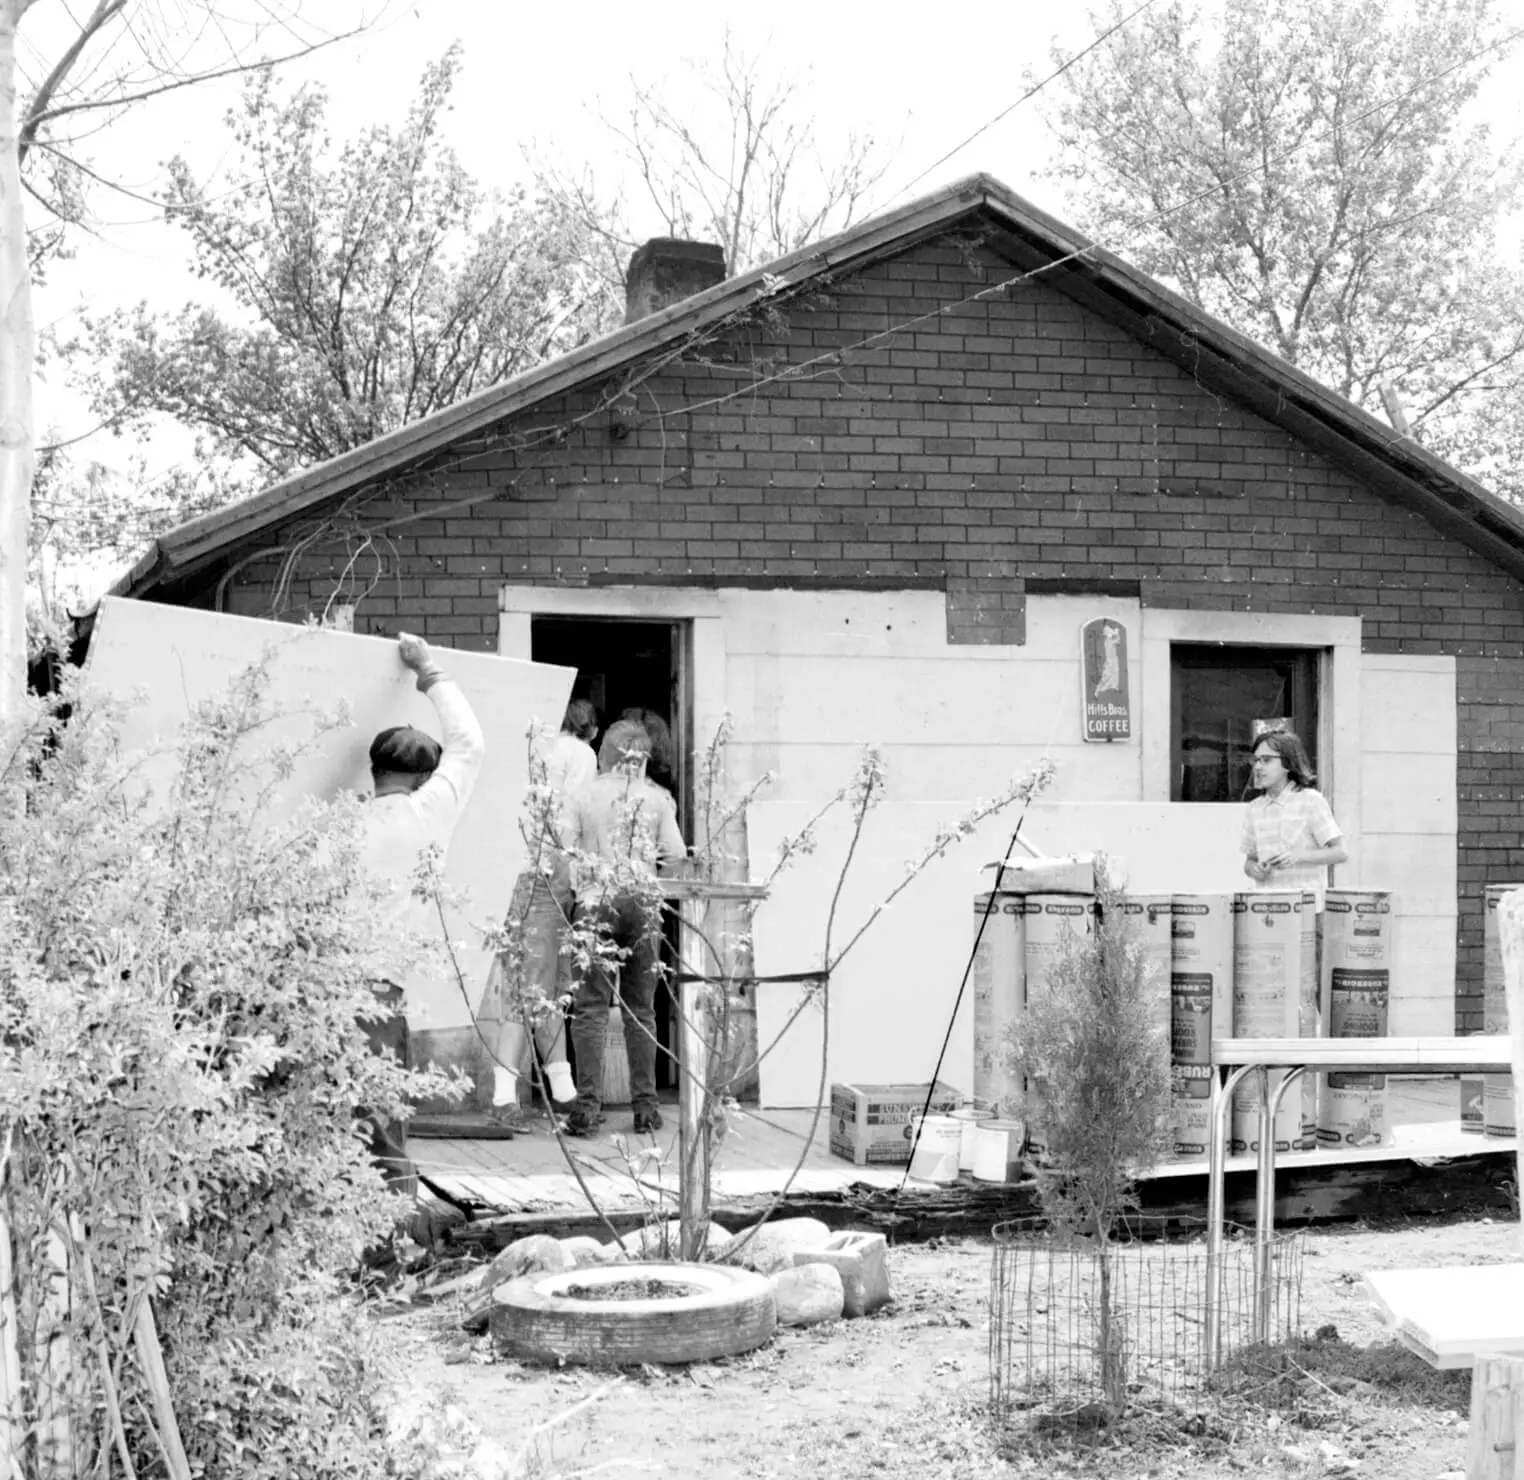 Work being completed on Pennick's home.